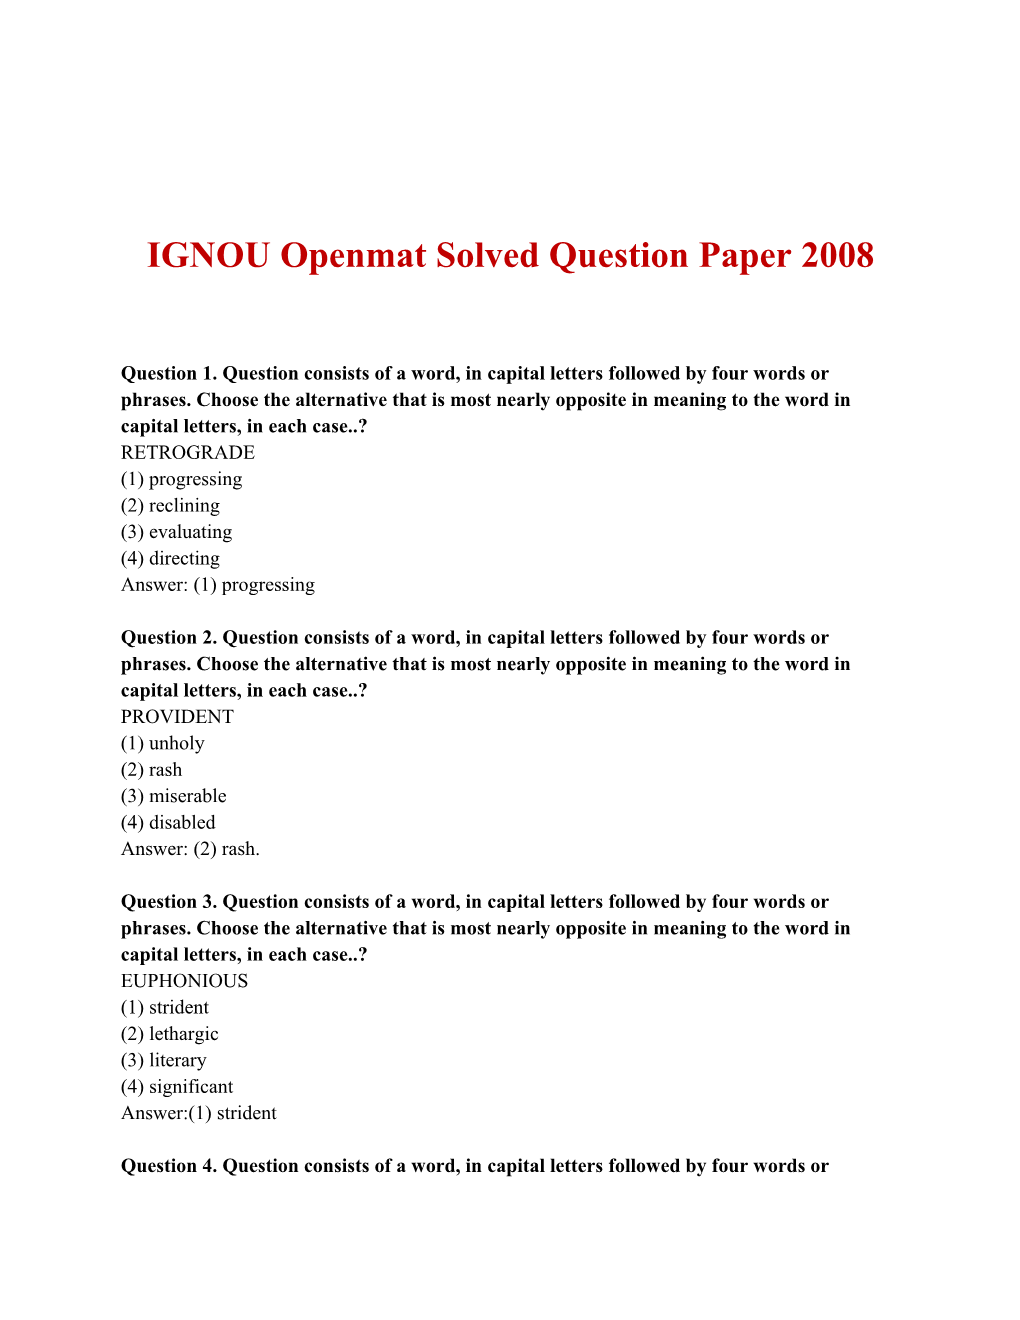 IGNOU Openmat Solved Question Paper 2008